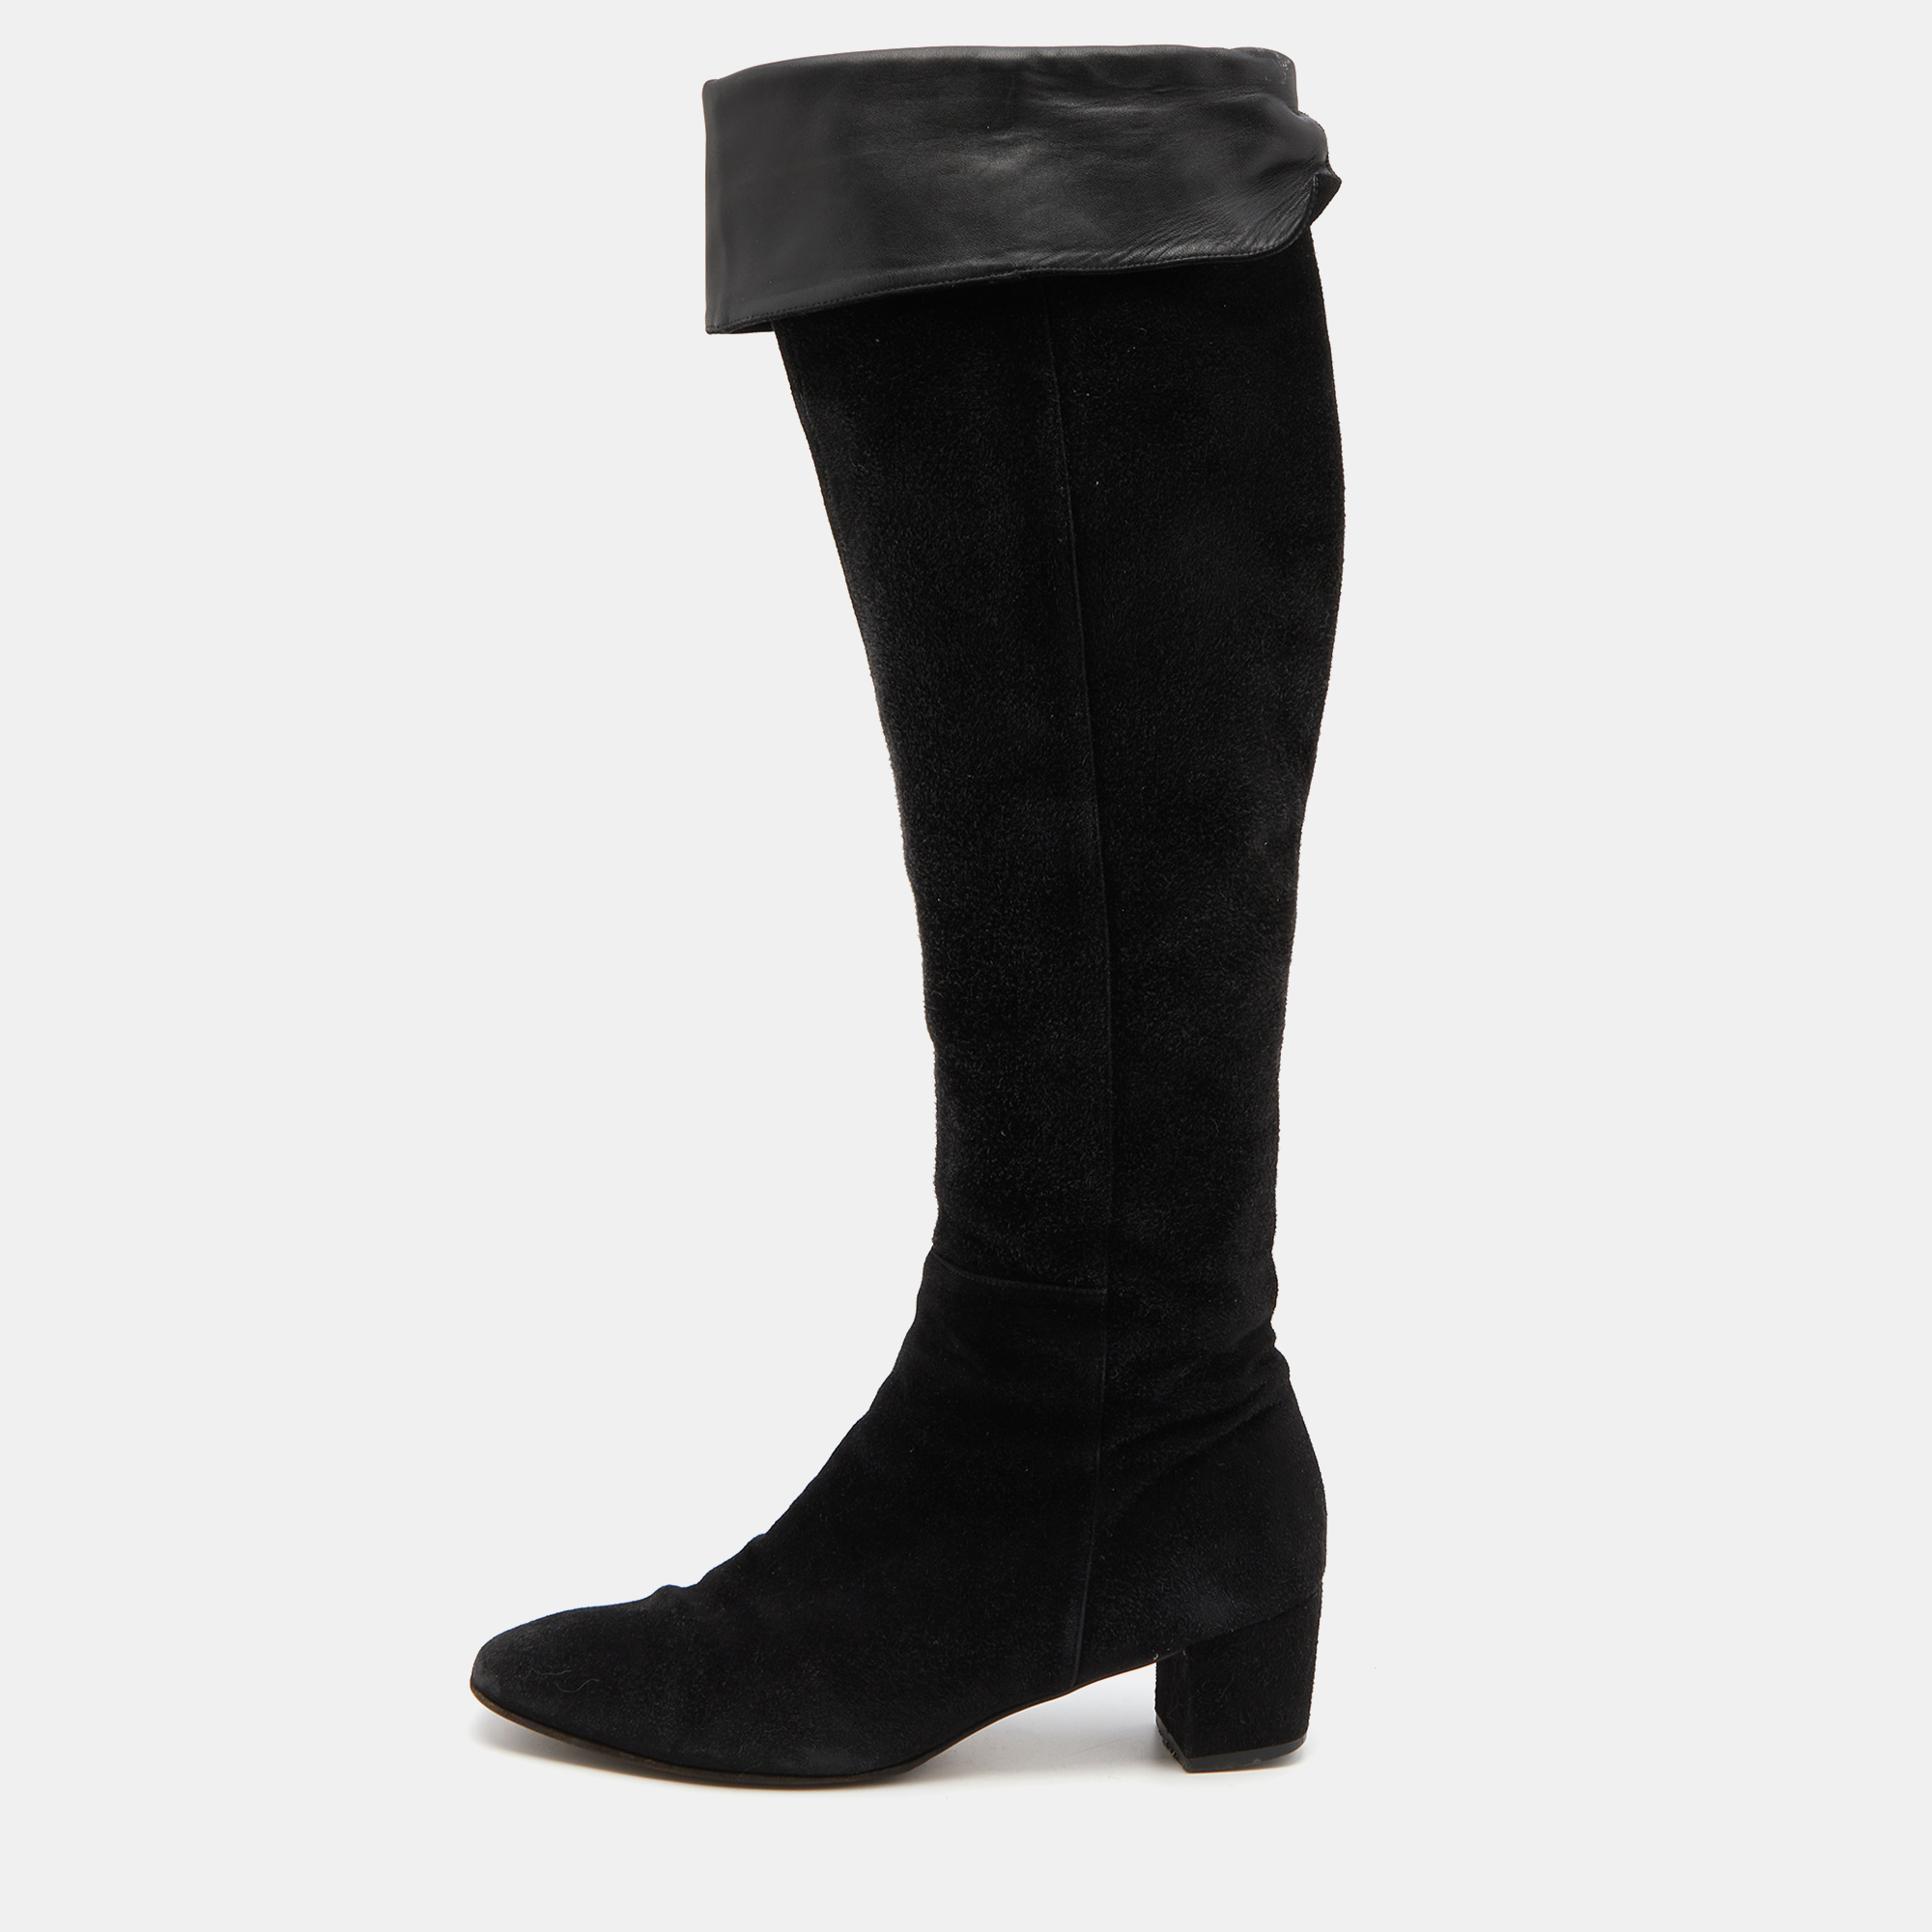 Gianvito Rossi Black Suede And Leather Knee Length Boots Size 38.5